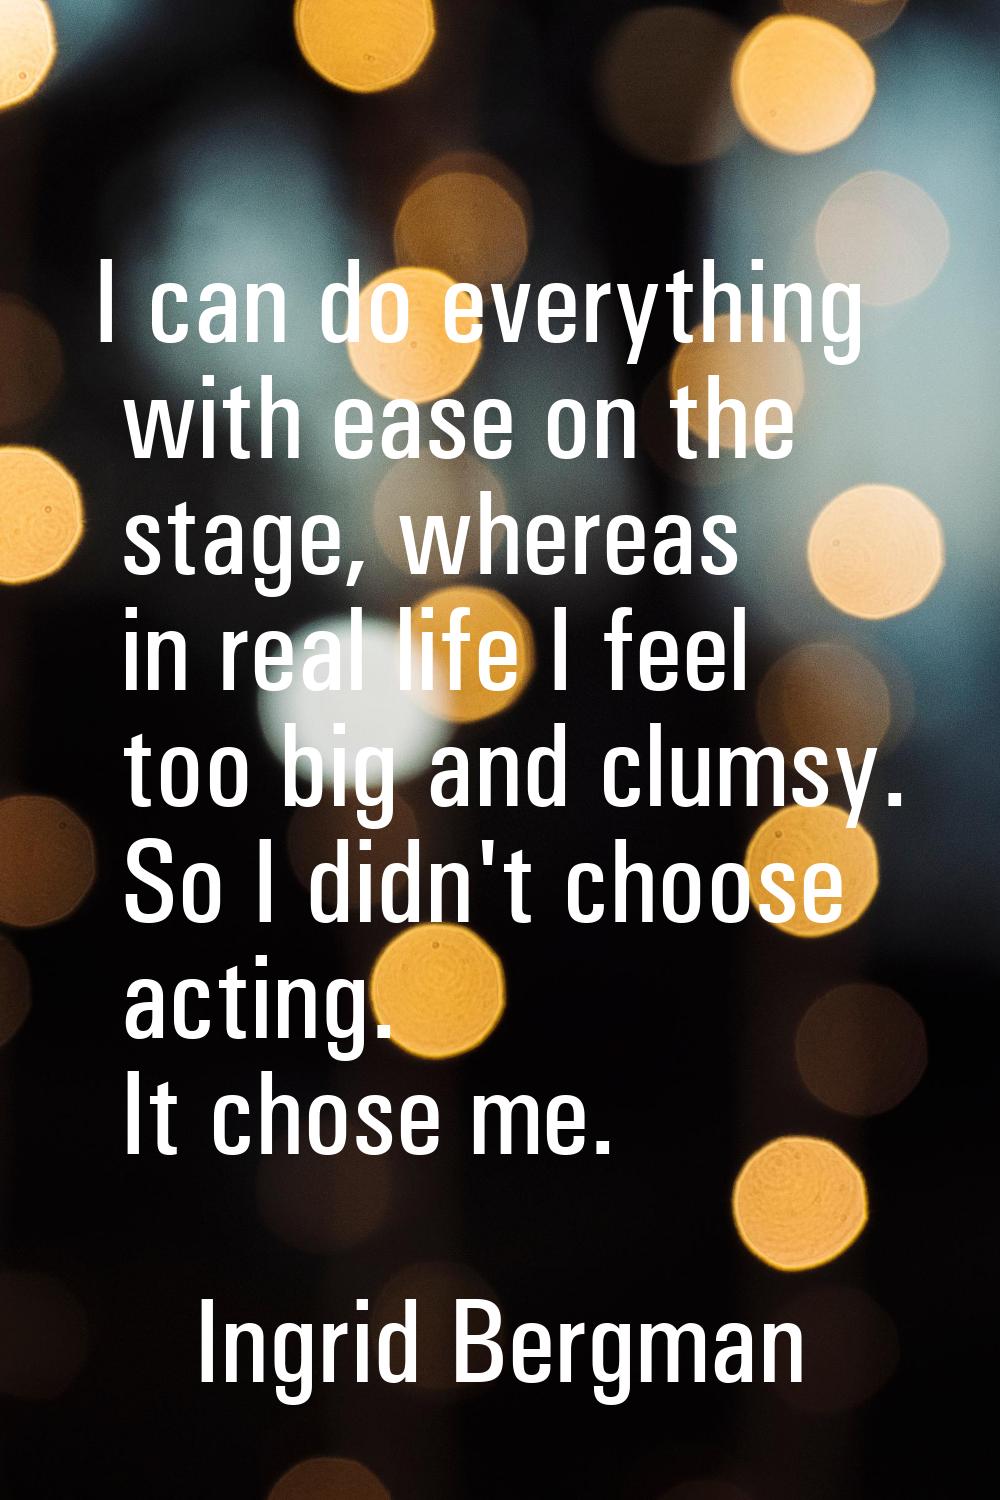 I can do everything with ease on the stage, whereas in real life I feel too big and clumsy. So I di